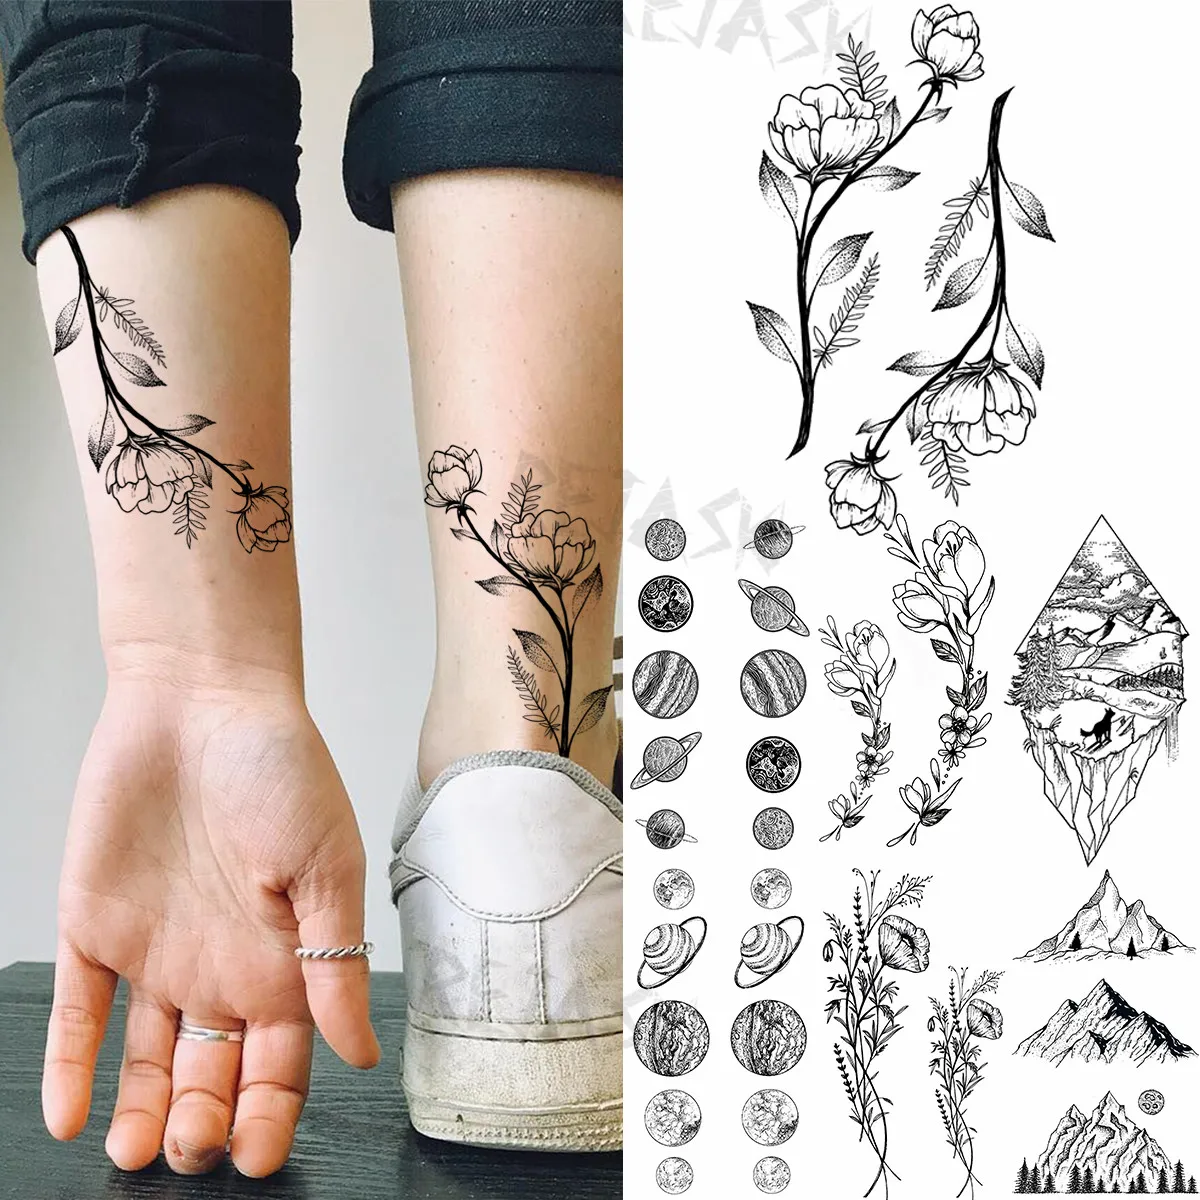 

3D Small Daffodil Bouquet Temporary Tattoos For Women Adult Planet Universe Mountain Fake Tattoo Waterproof Body Art Tatoo Decal